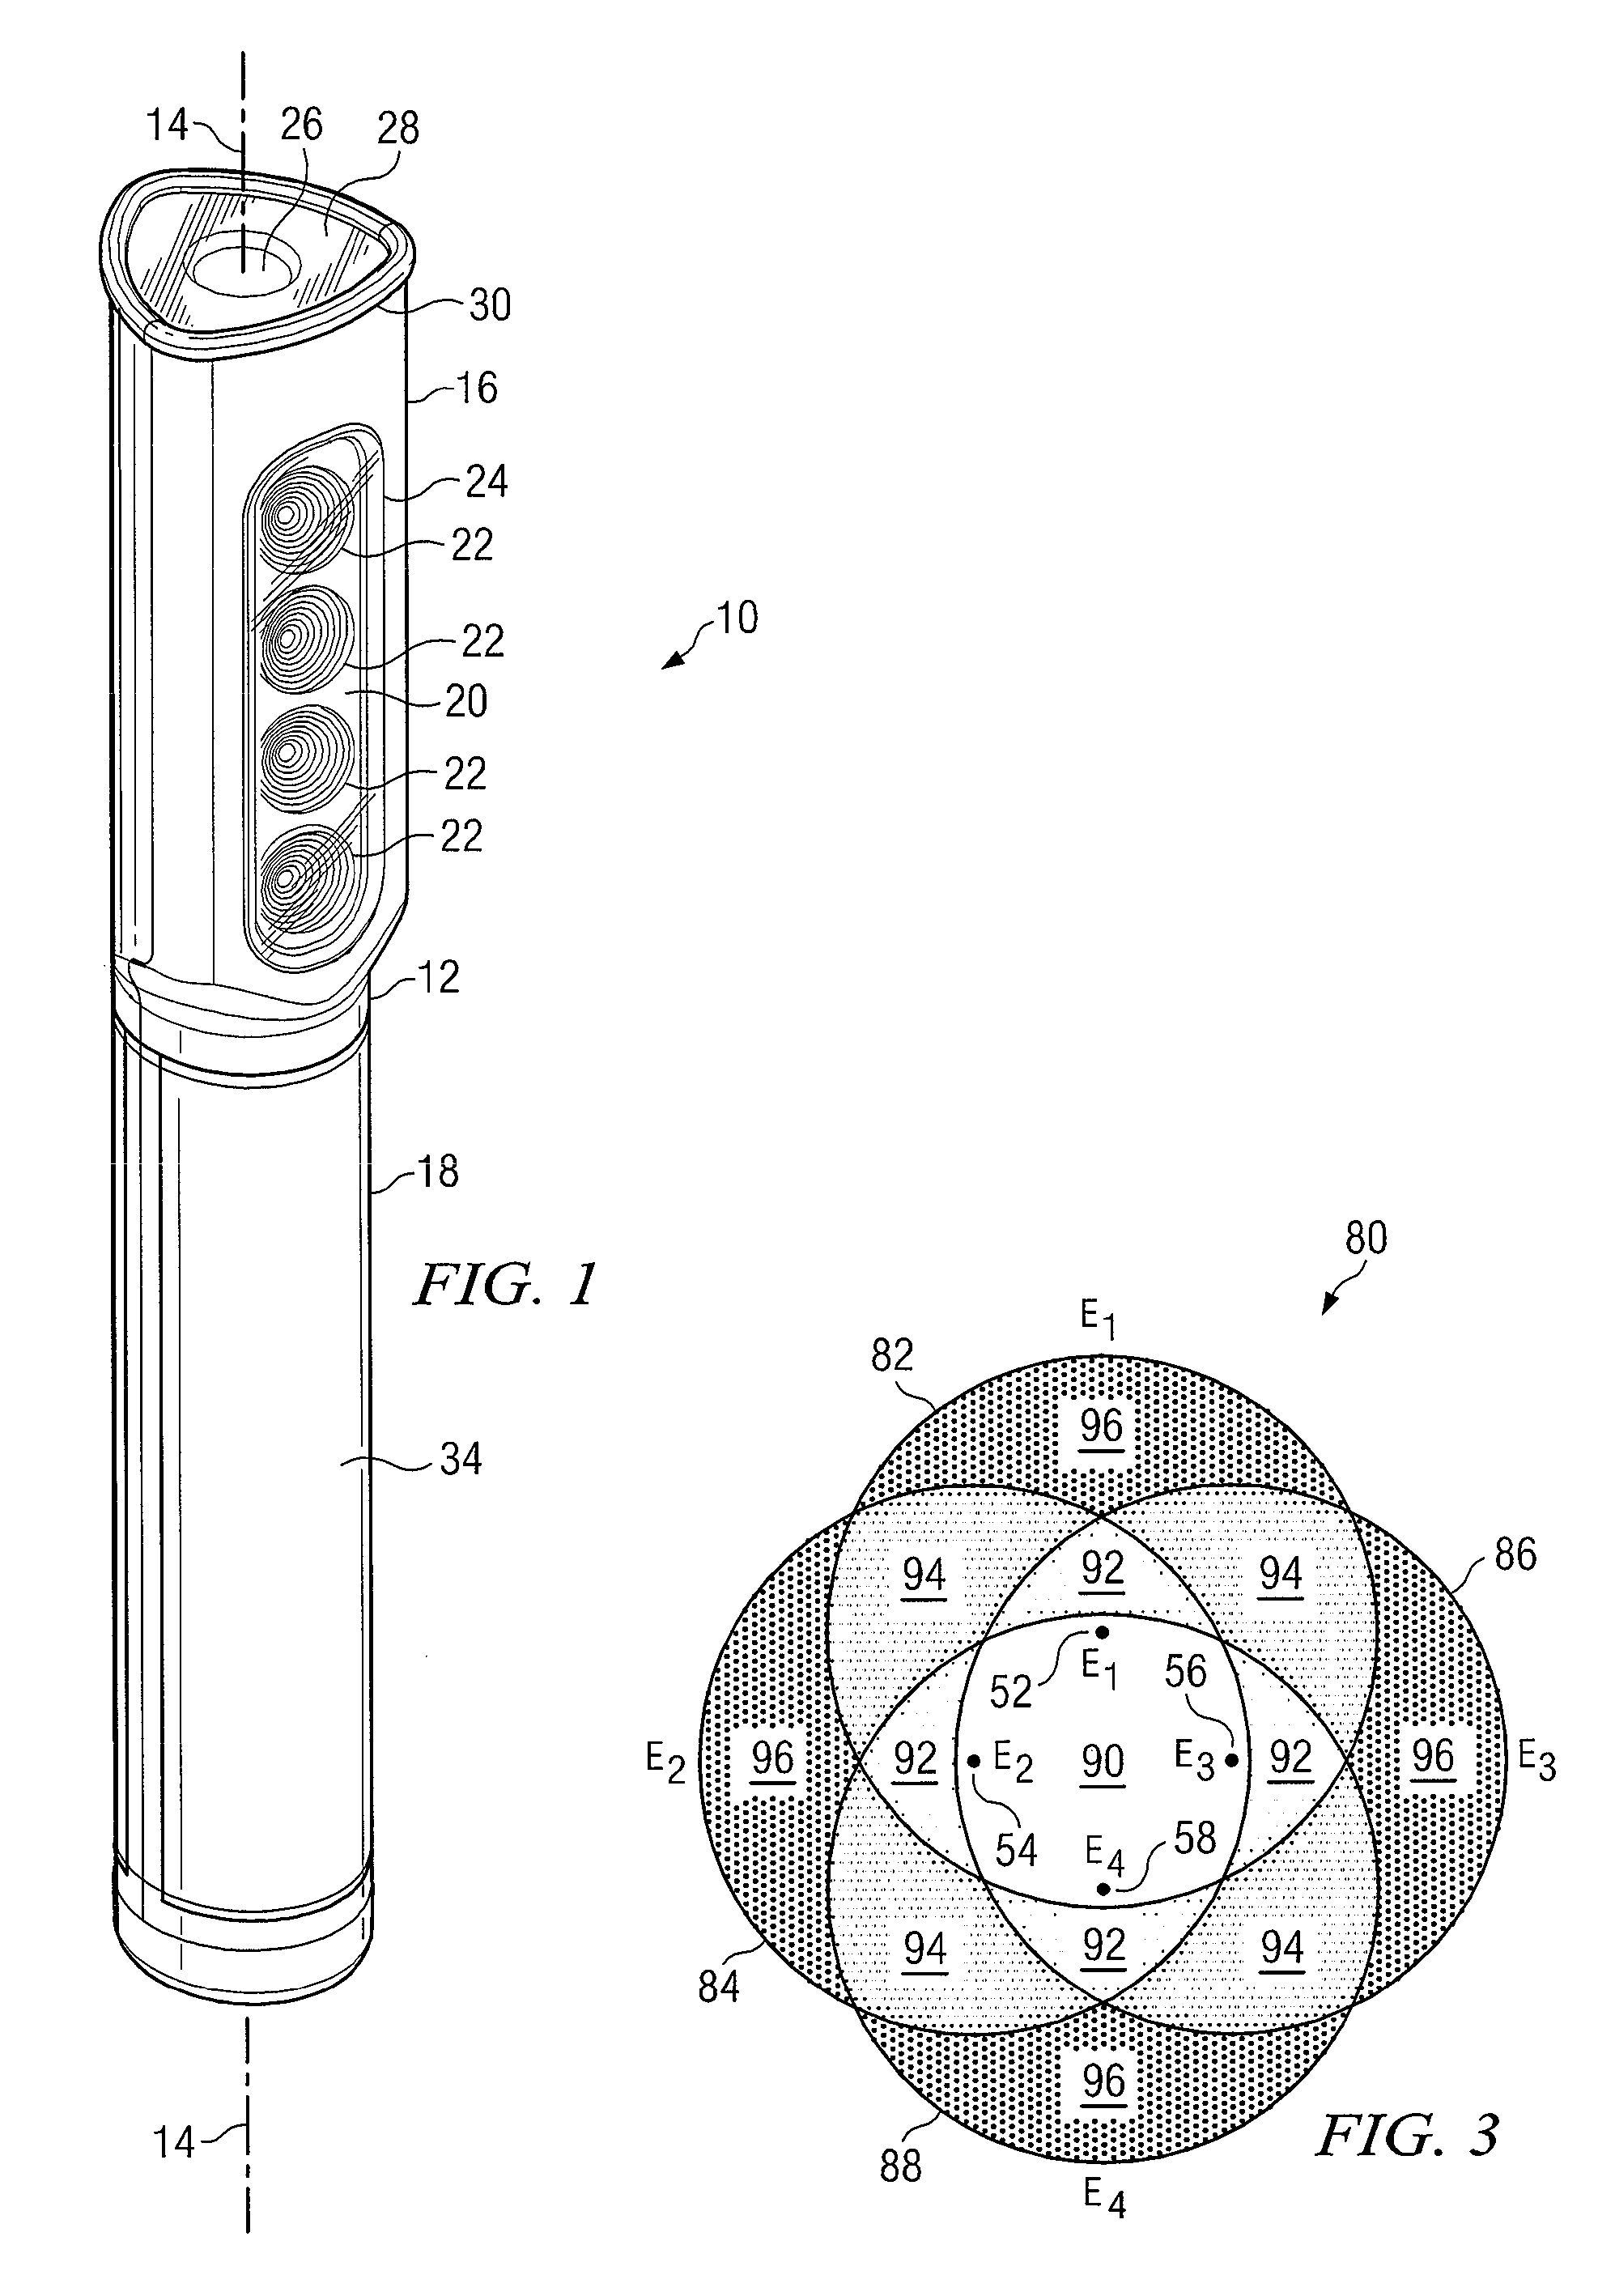 Microprocessor-controlled multifunction light with intrinsically safe energy limiting